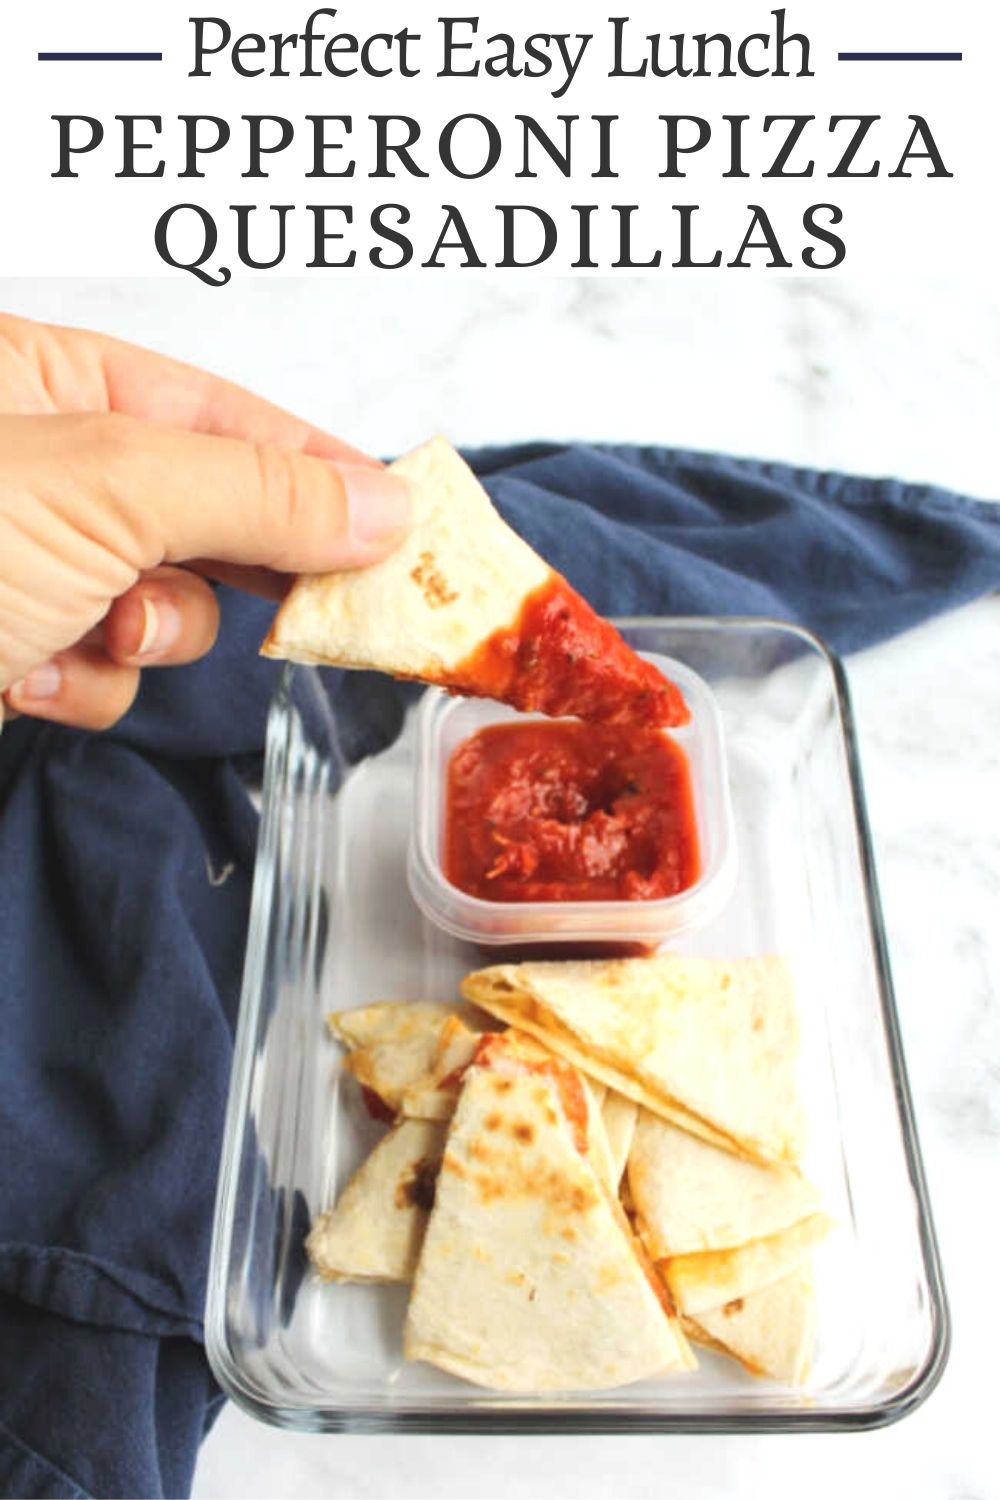 Lunch just got better with these quick and easy pizza quesadillas. They are perfect for lunchboxes, after school snacks and more!